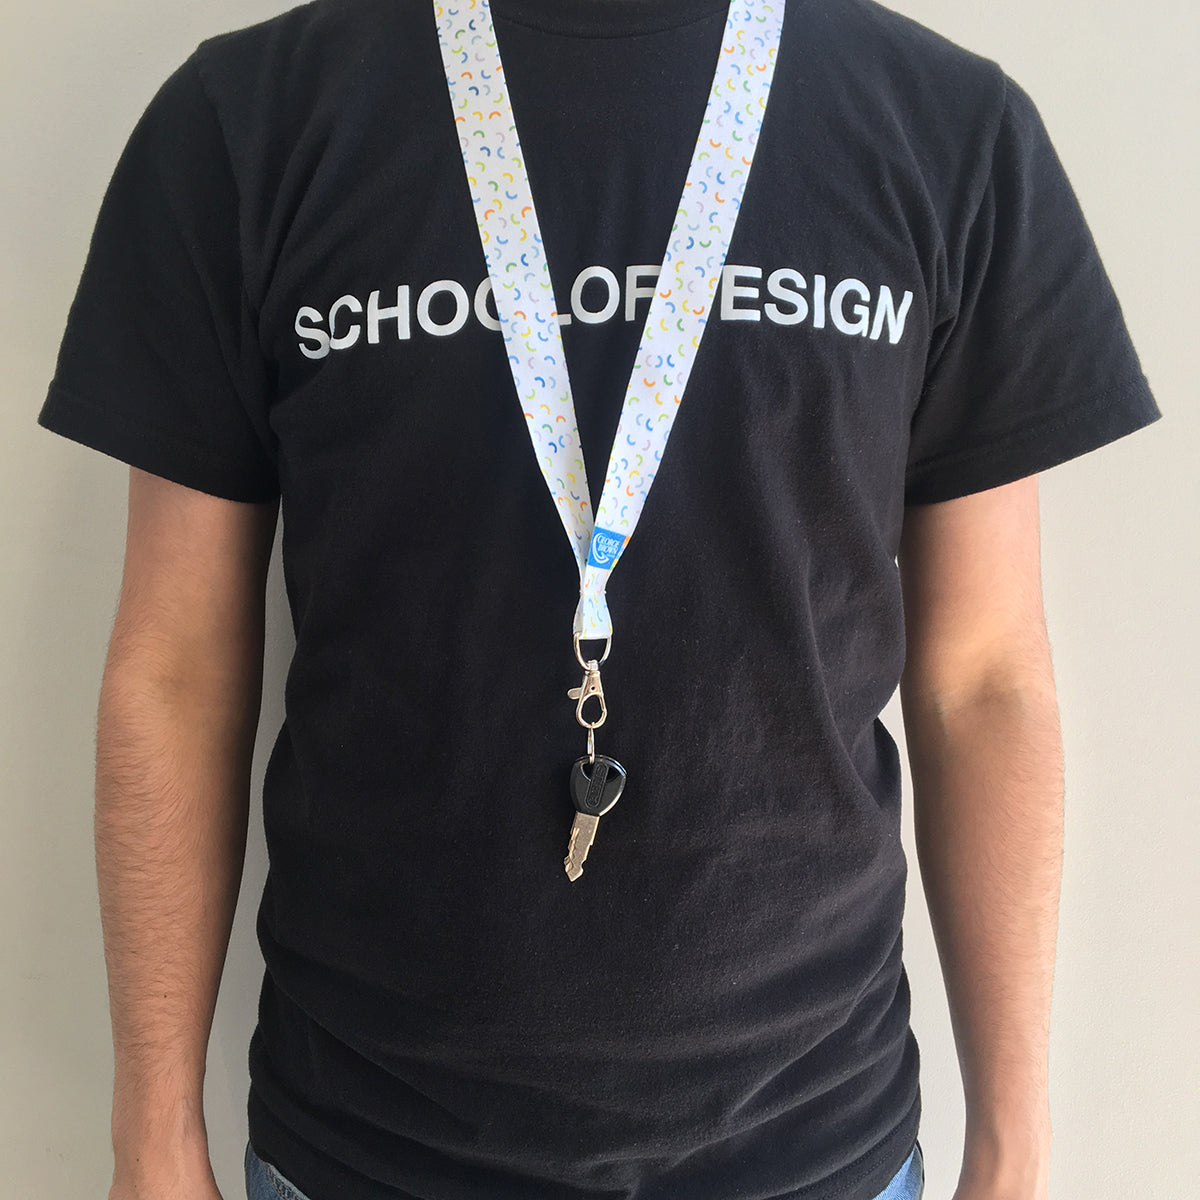 male wearing white lanyard with colourful macaroni pattern and school of design black cotton t shirt